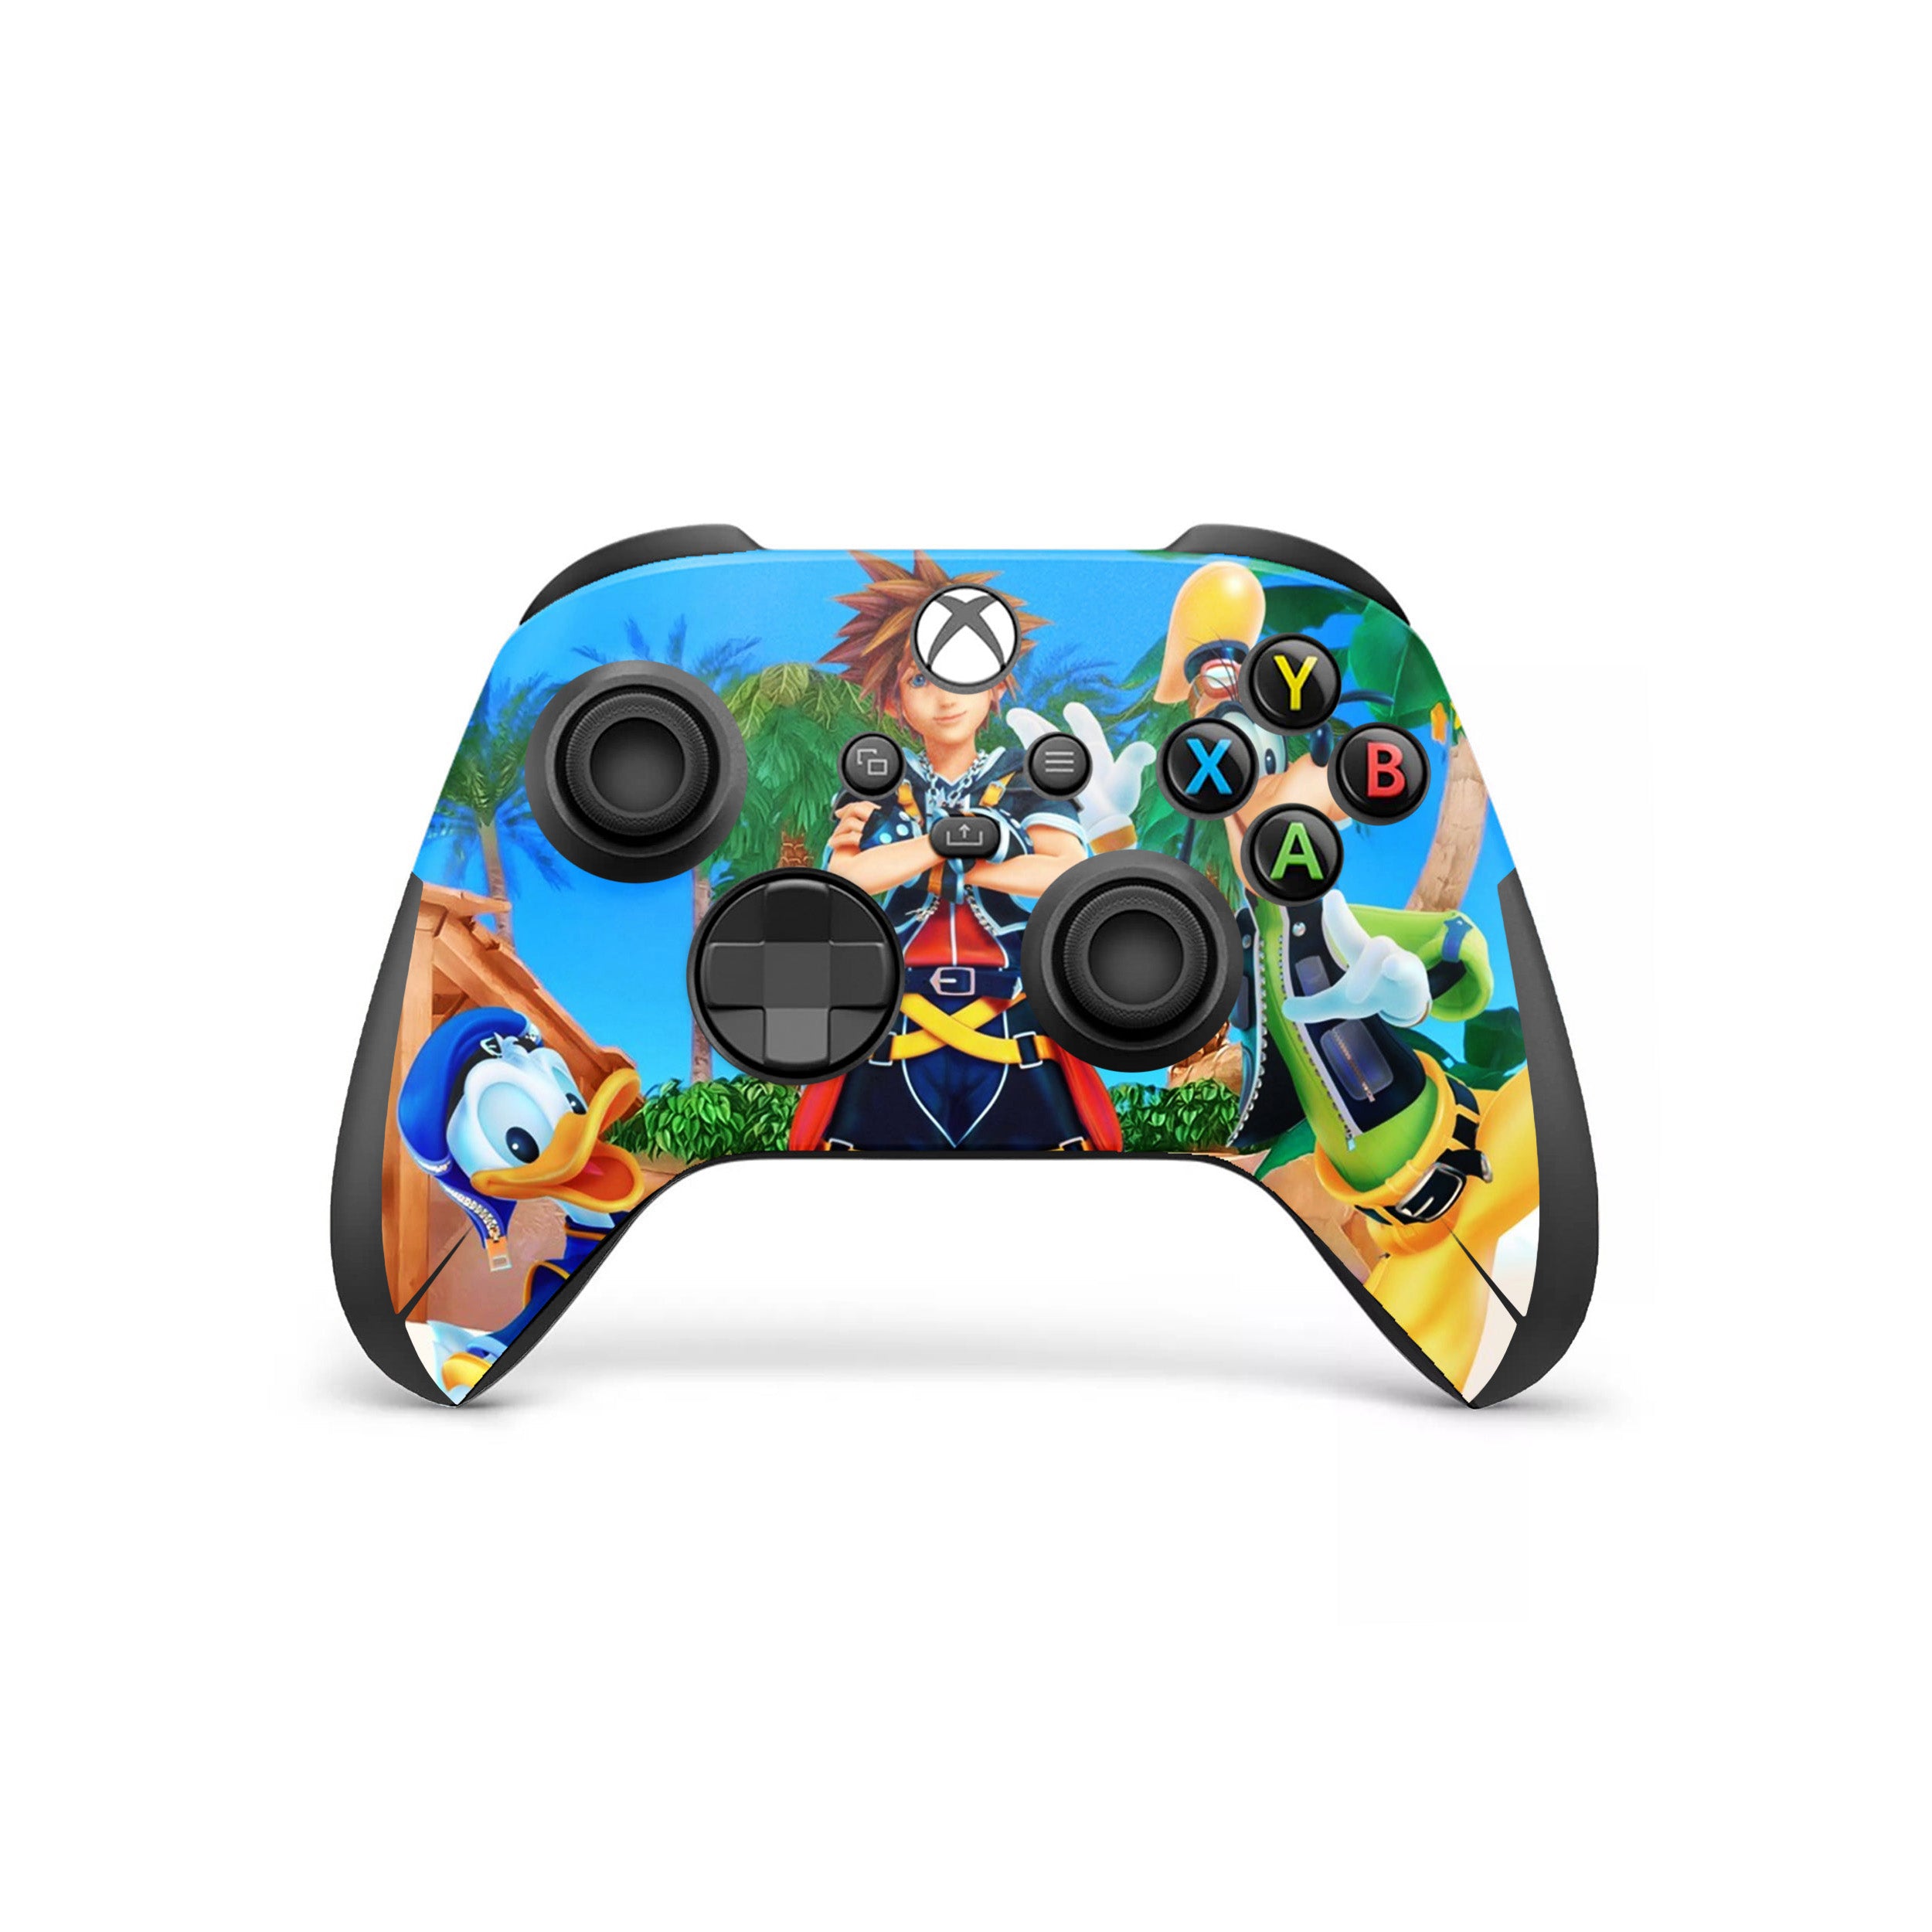 A video game skin featuring a Kingdom Hearts design for the Xbox Wireless Controller.